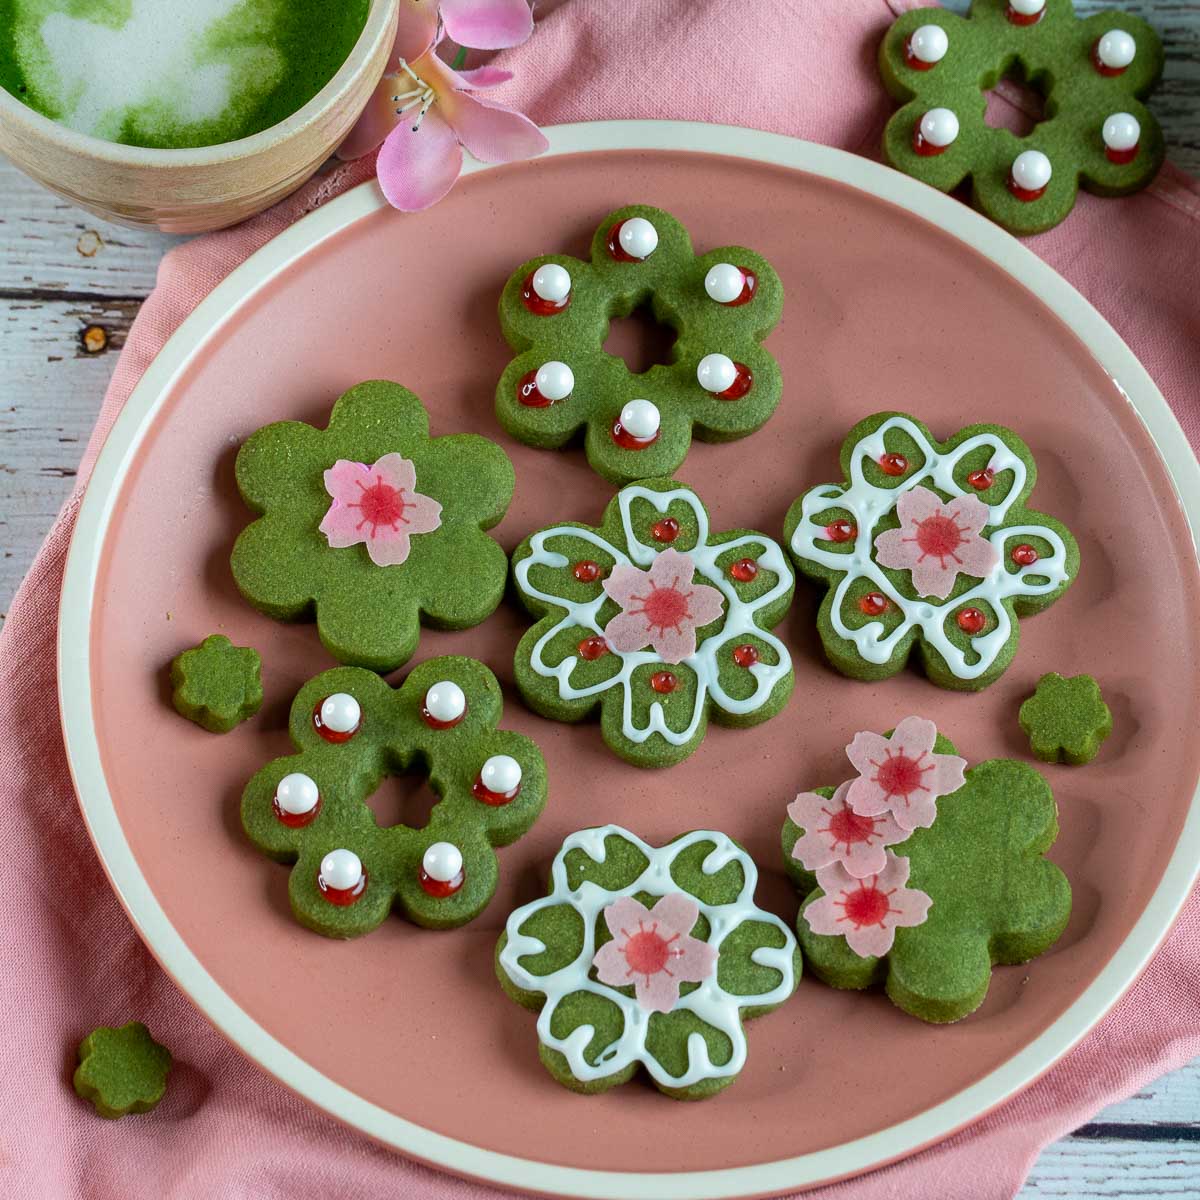 Sakura shortbread matcha cookies on a pink plate with a side of matcha latte.